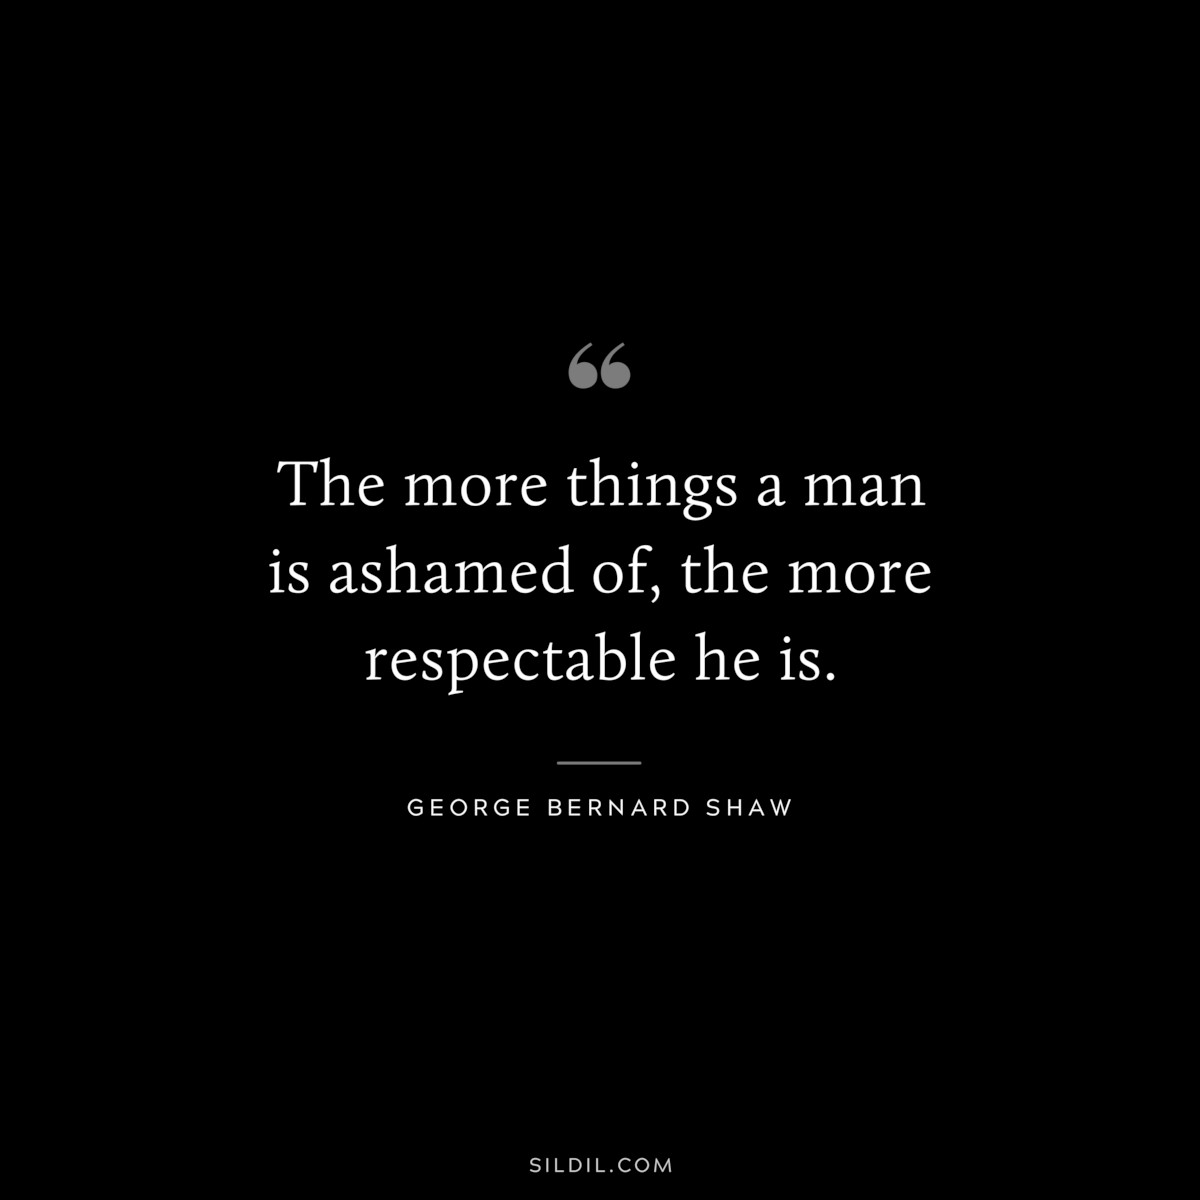 The more things a man is ashamed of, the more respectable he is. ― George Bernard Shaw